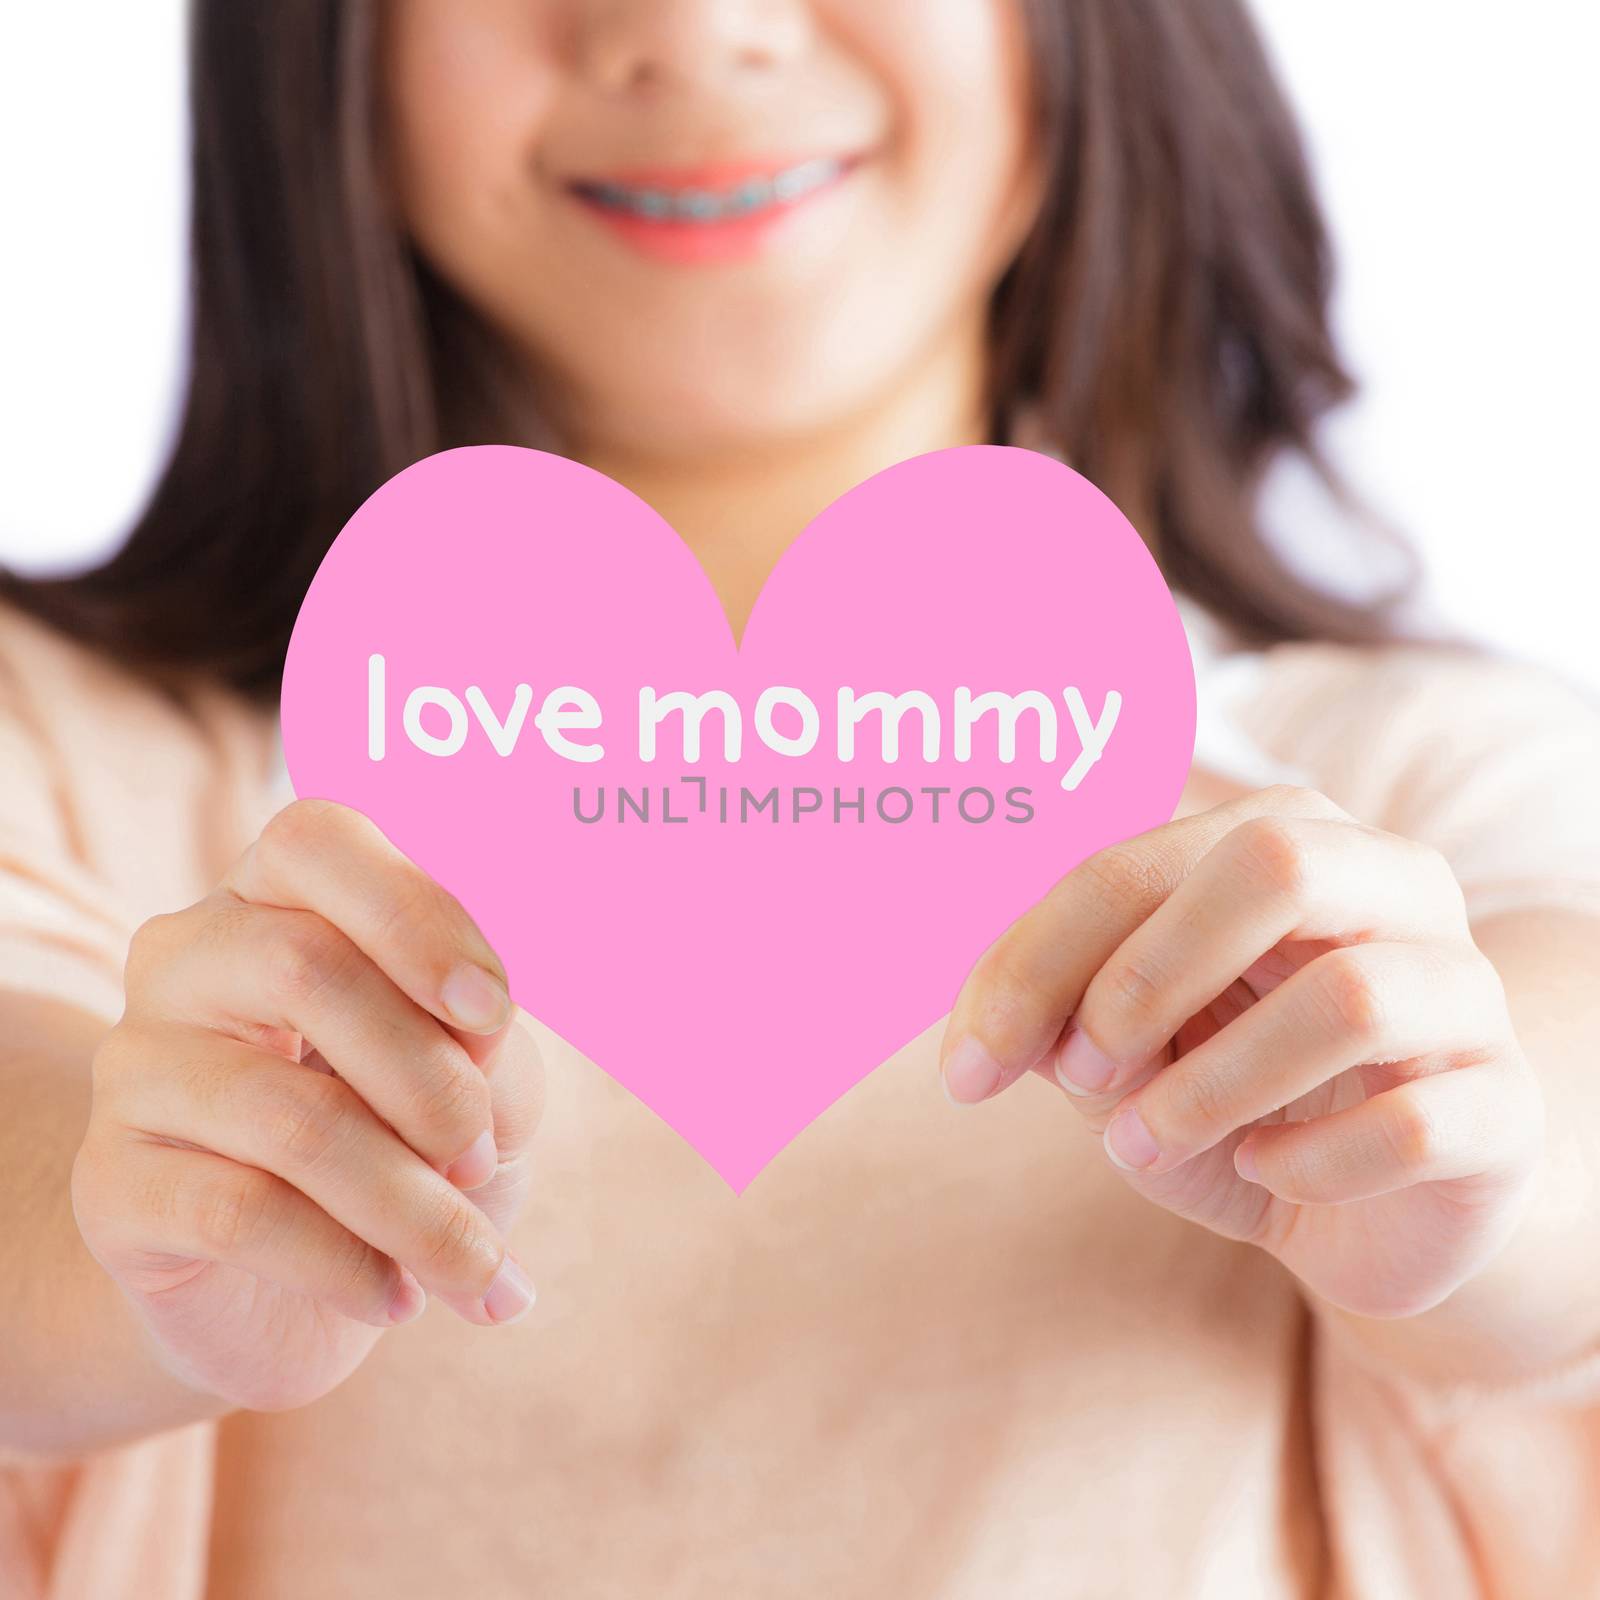 Woman holding pink heart with love mommy